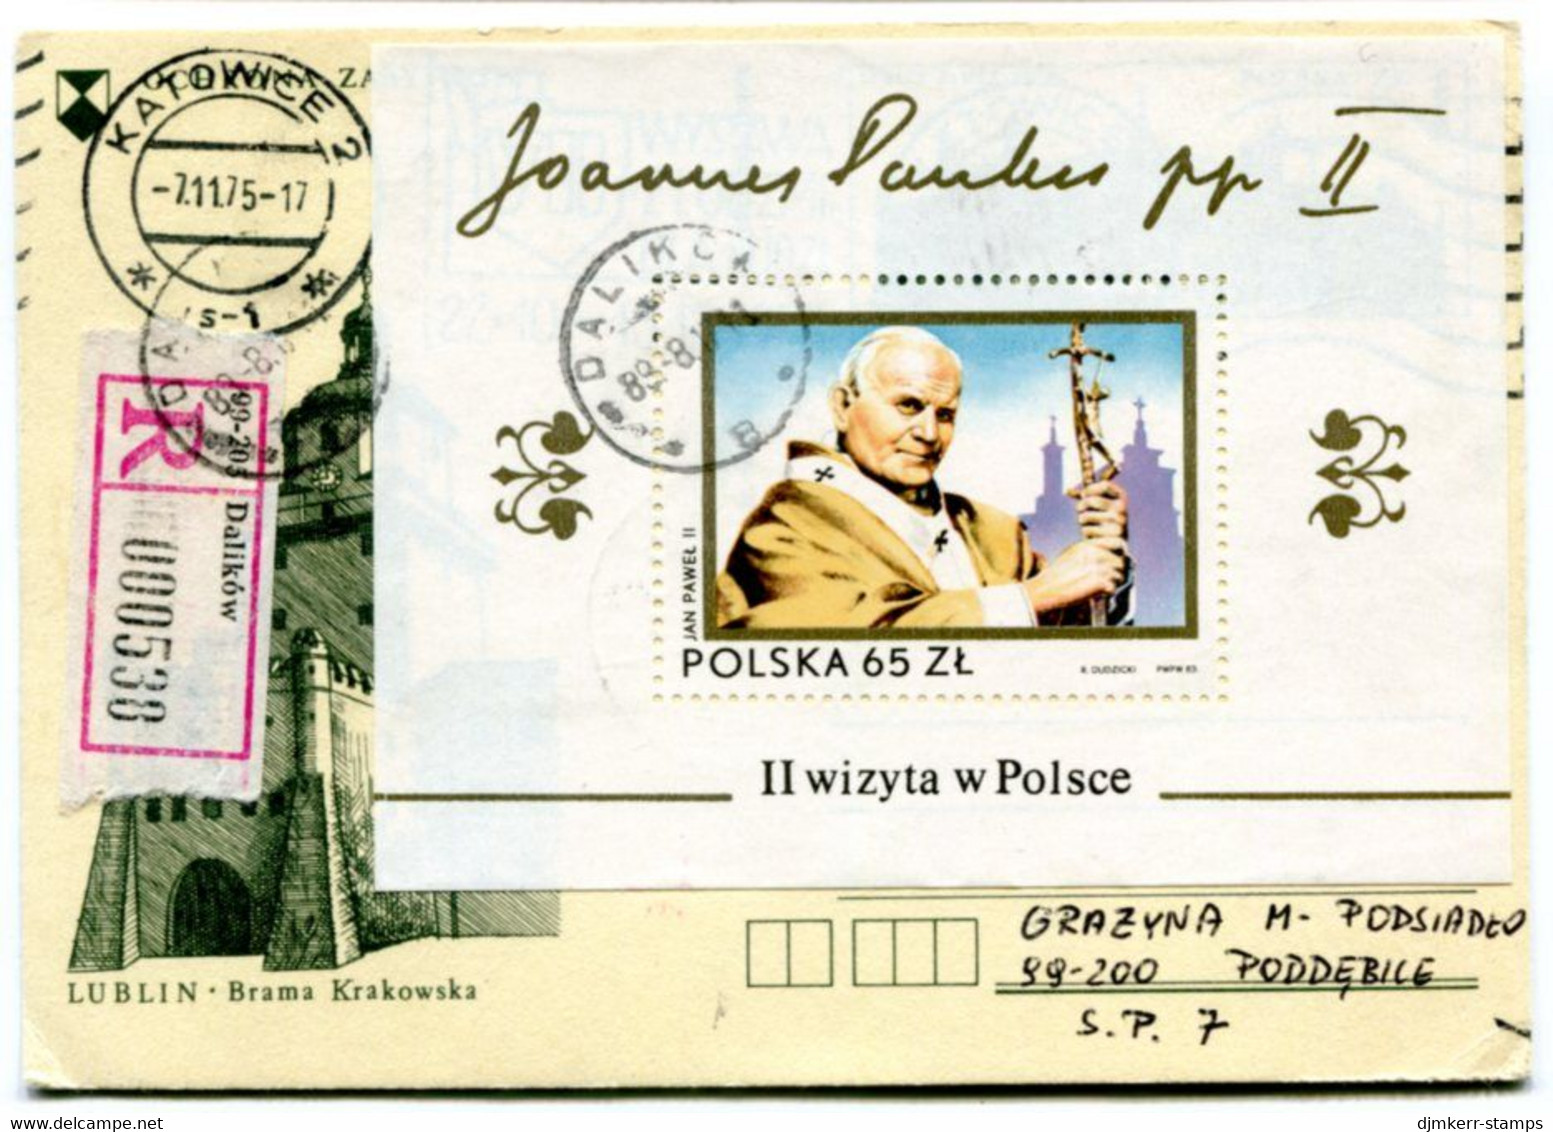 POLAND 1983 Papal Visit Block Used On Card  Michel Block 91 - Used Stamps